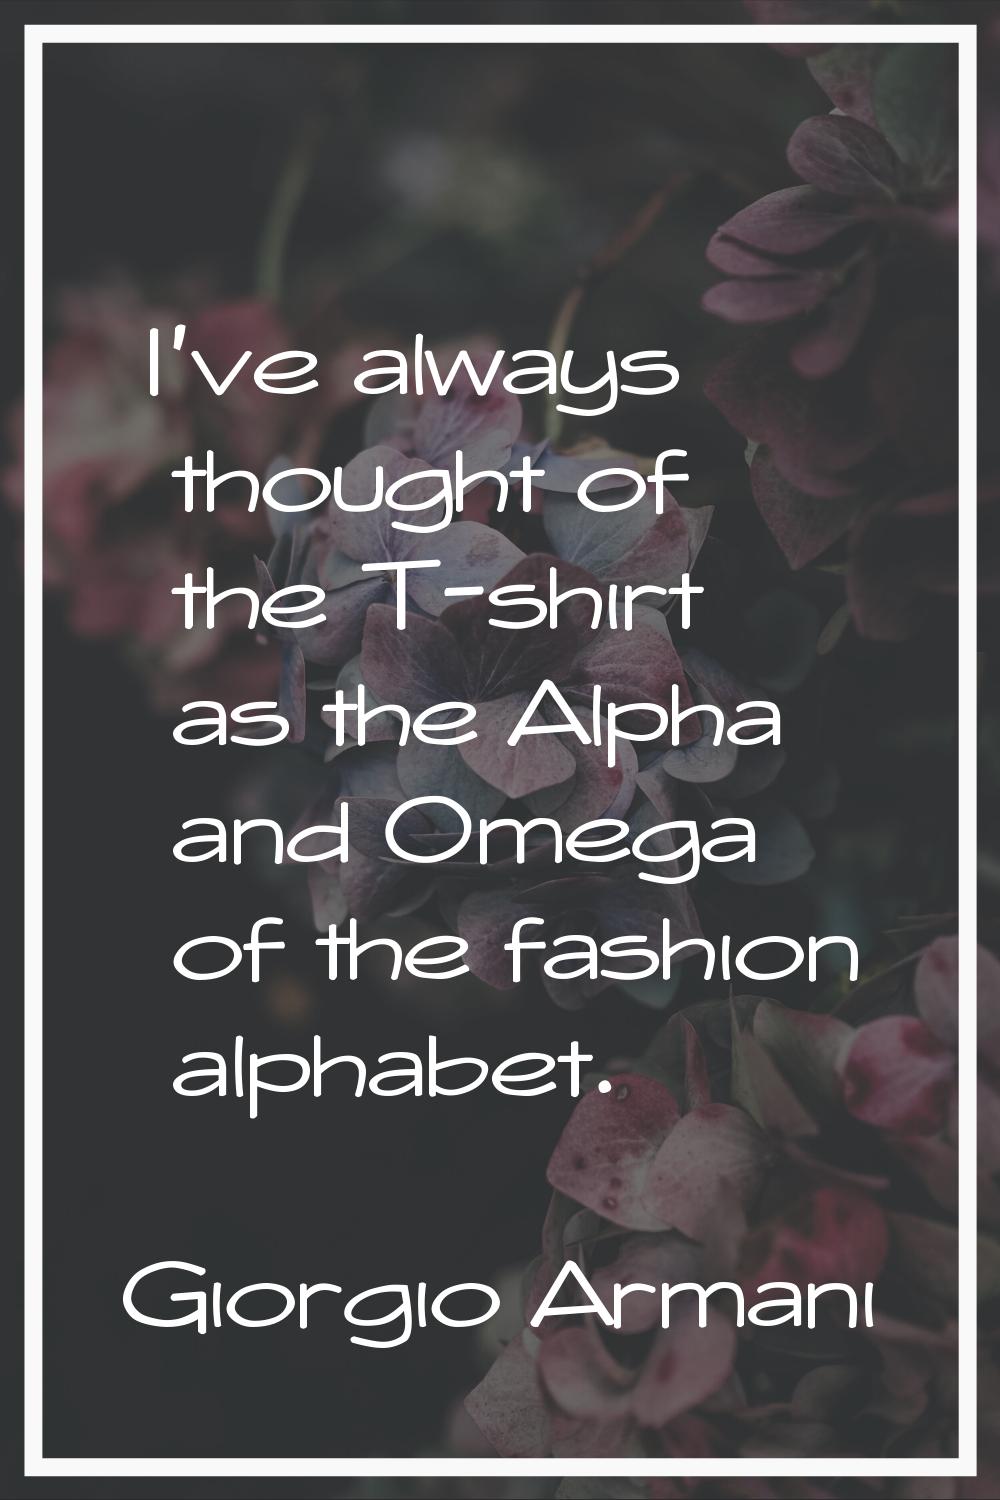 I've always thought of the T-shirt as the Alpha and Omega of the fashion alphabet.